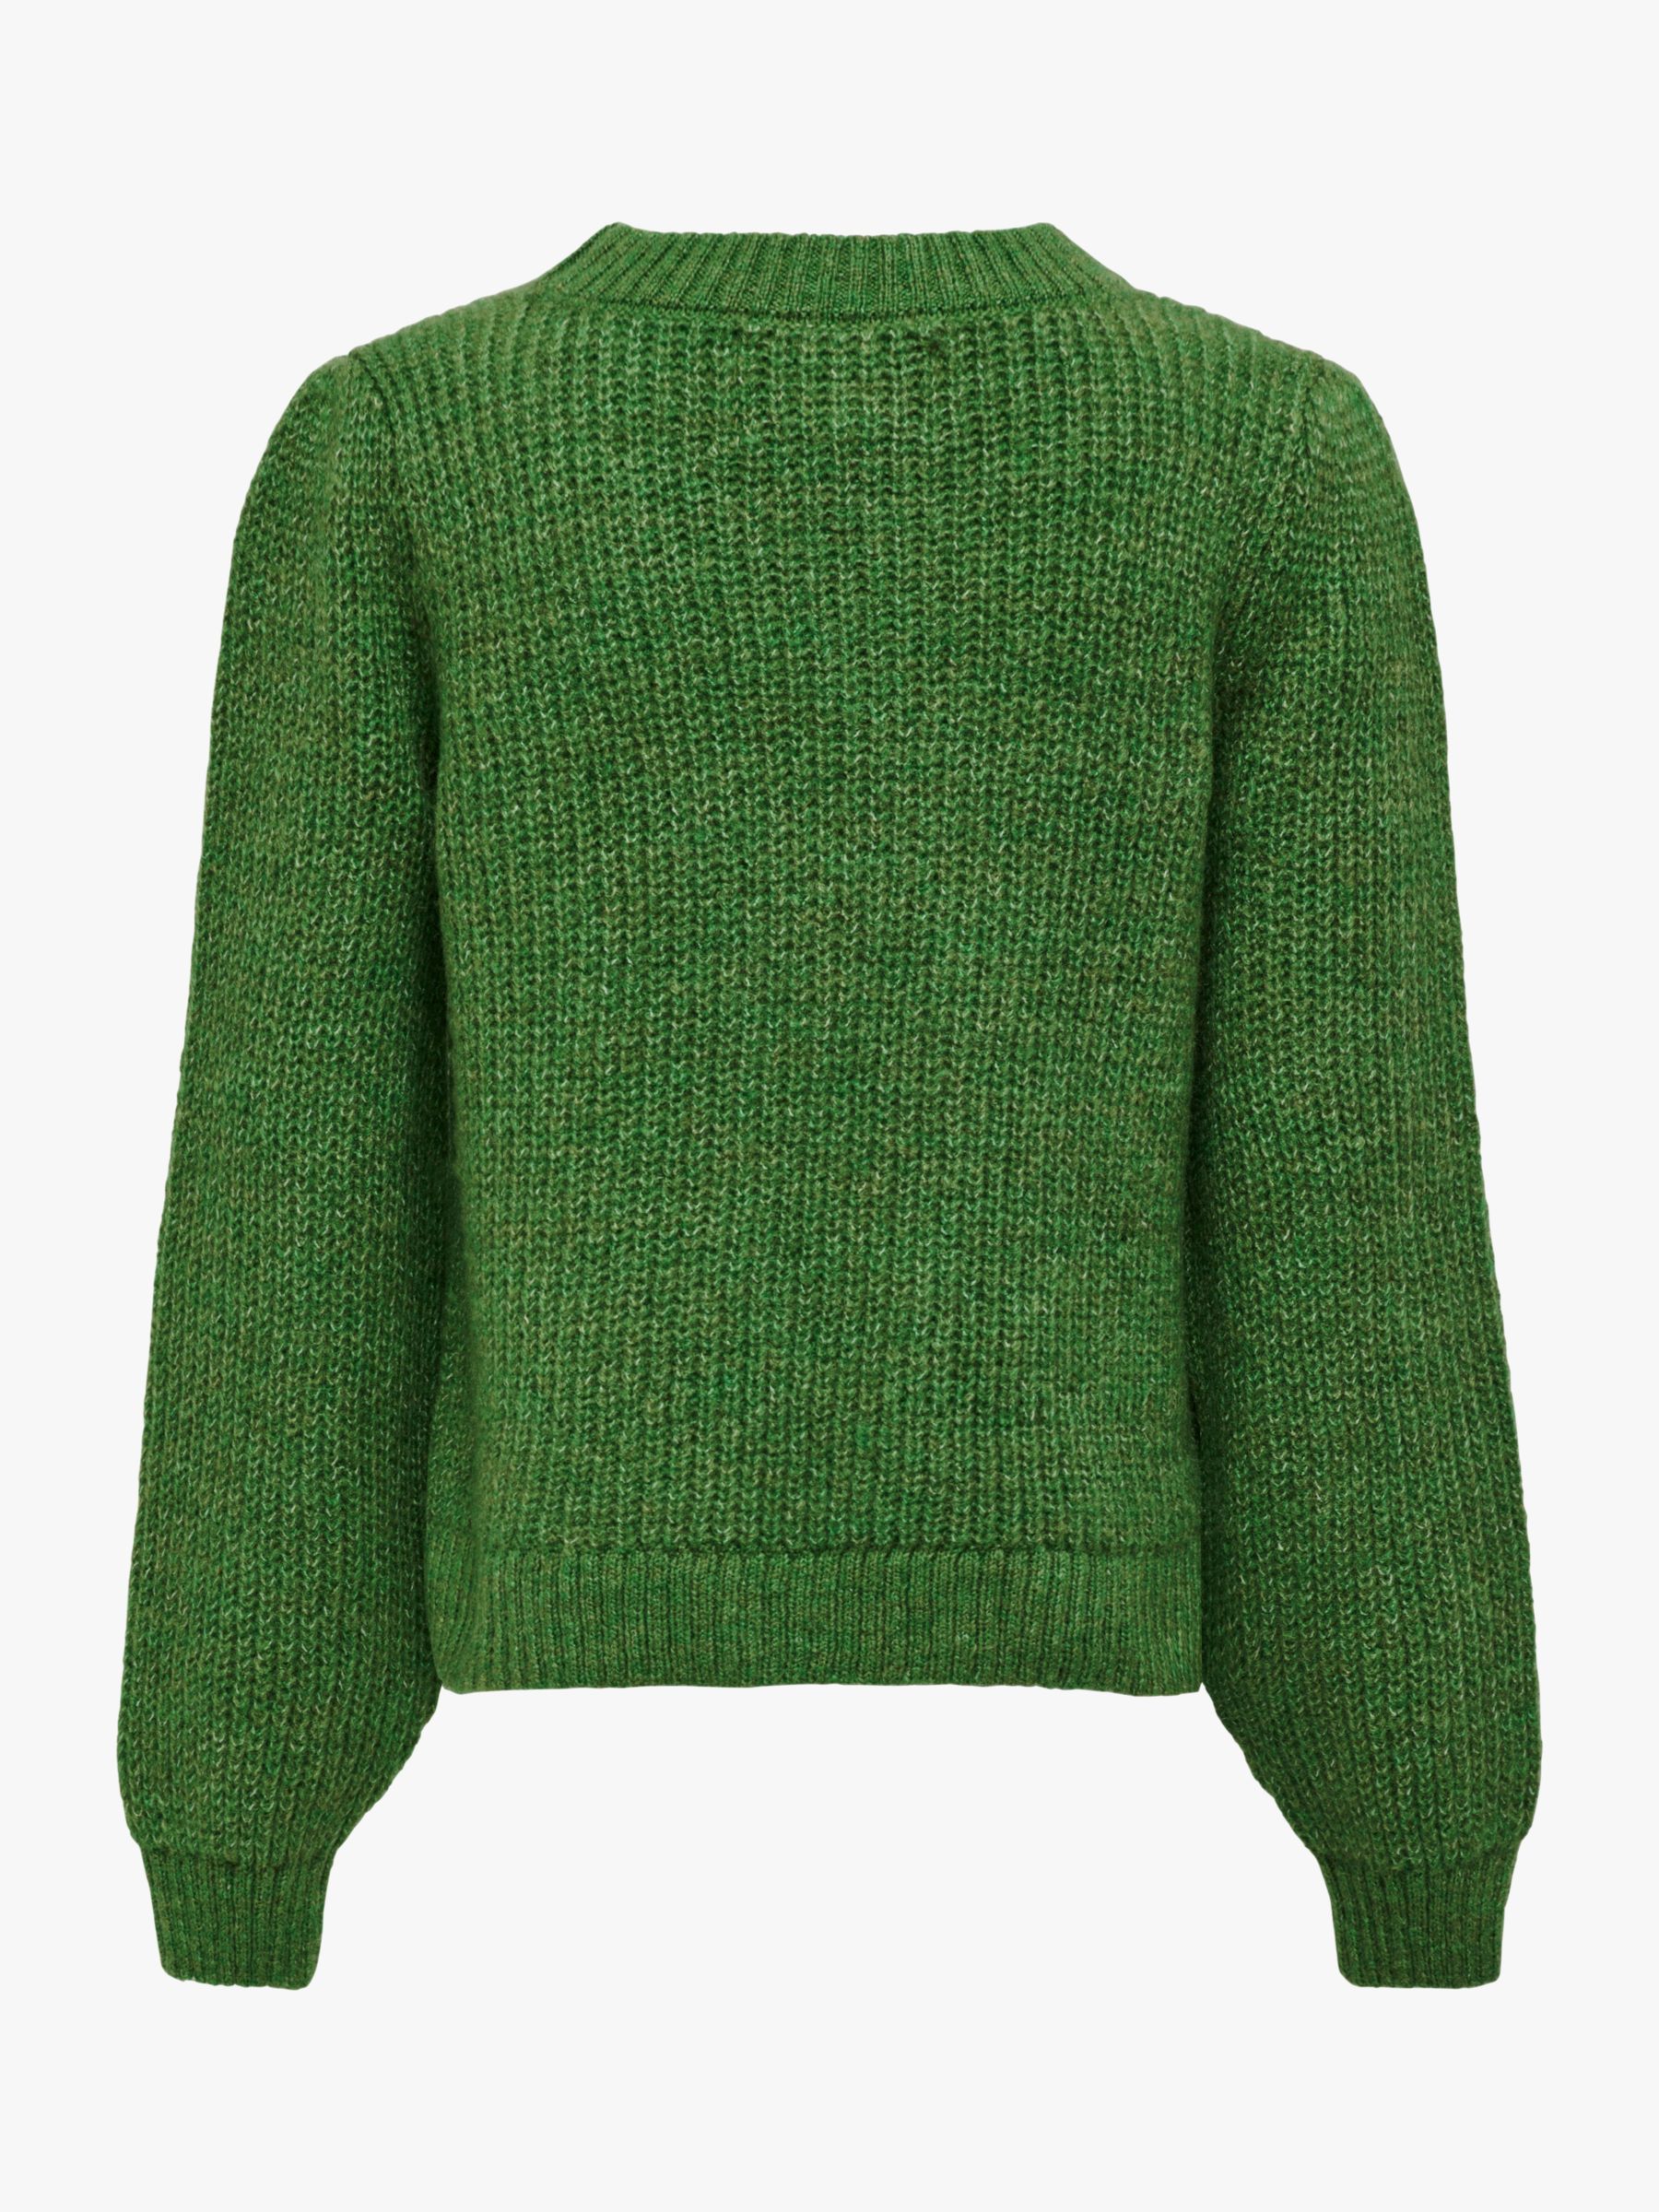 Kids ONLY Kids' NYC Knitted Jumper, Green, 9-10 years